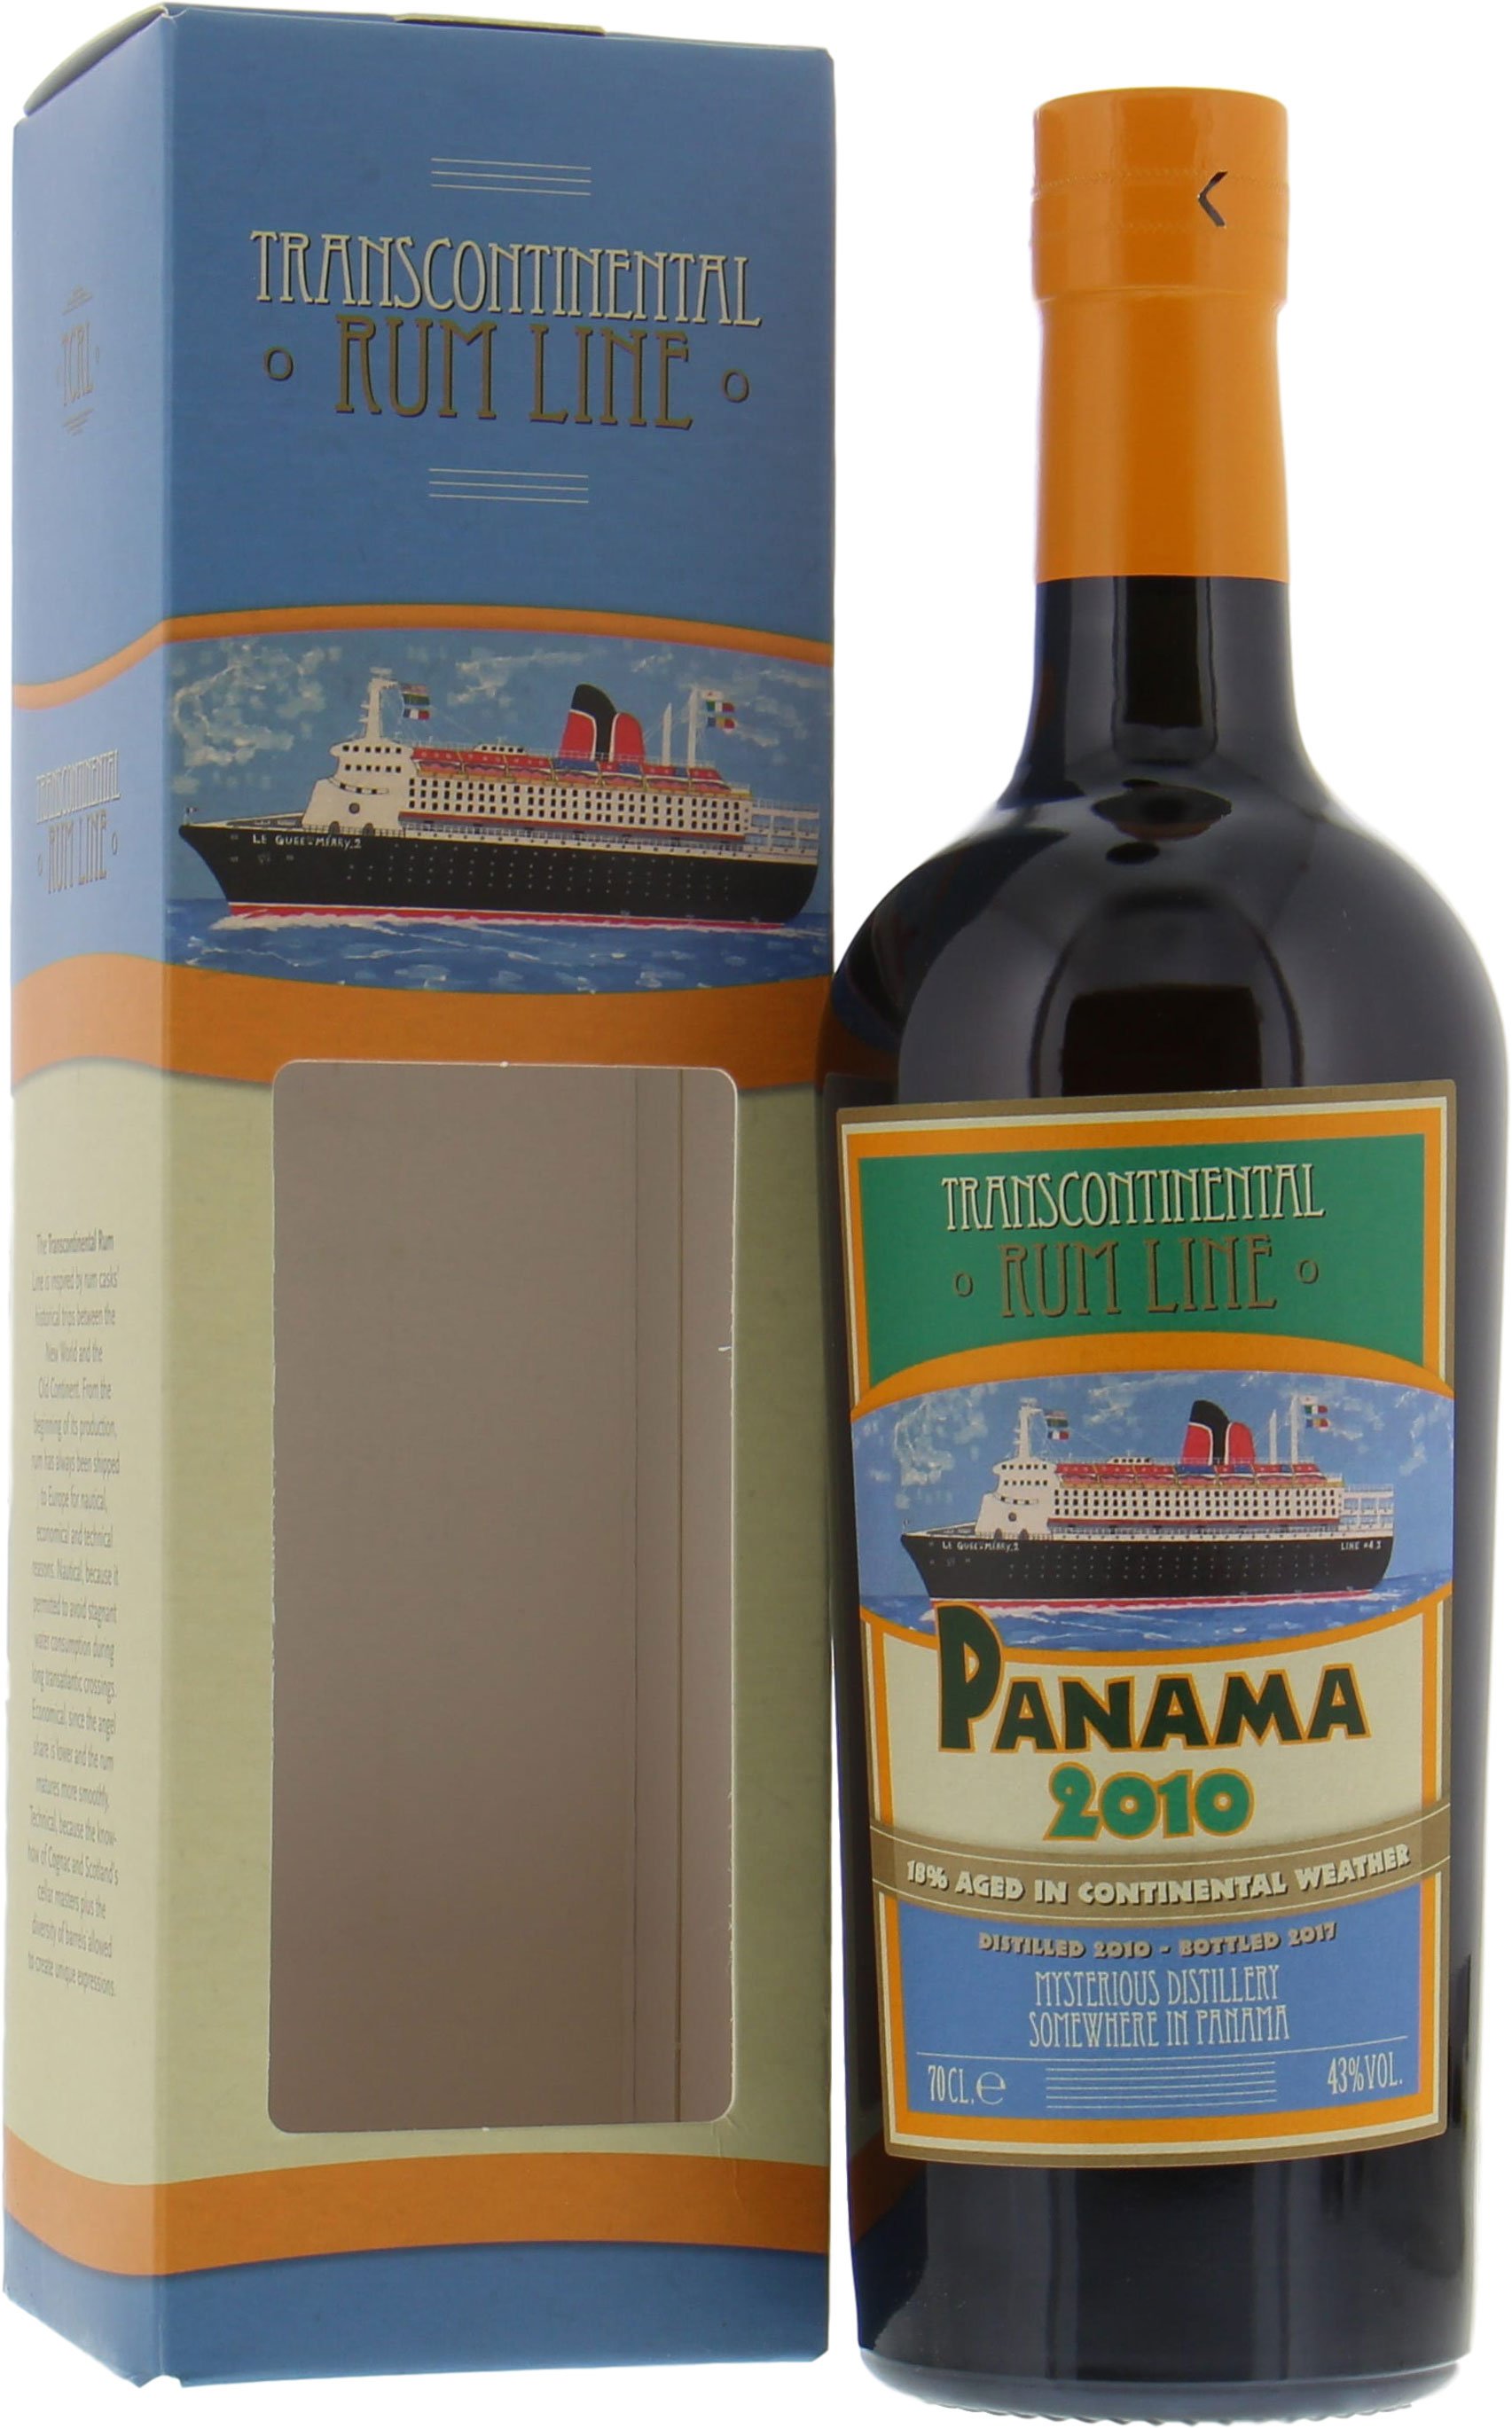 Transcontinental Rum Line - Panama Mysterious Distillery Limited Edition Batch #3 43% 2010